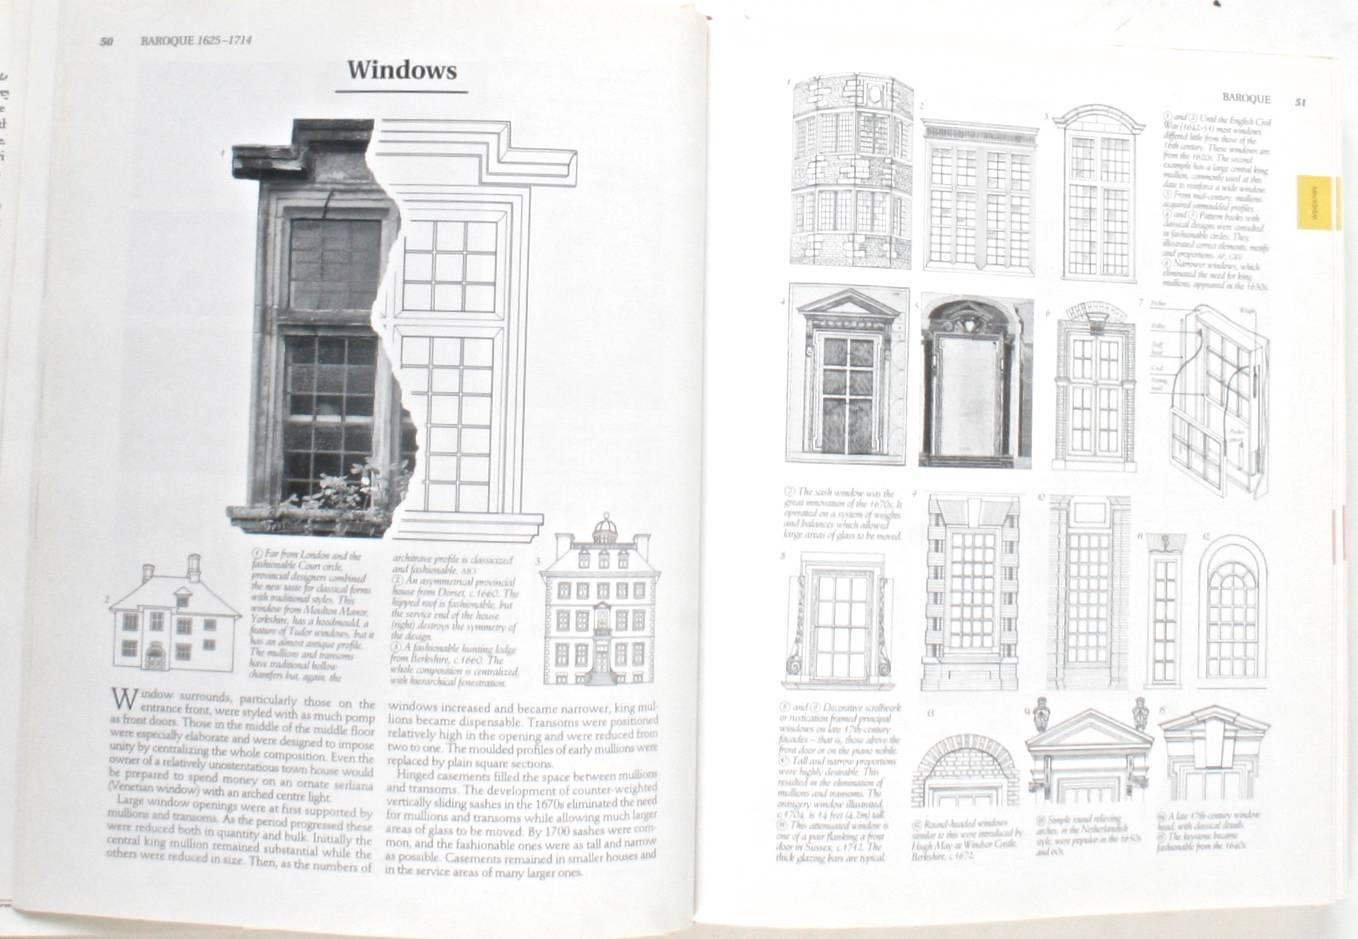 Paper Elements of Style, a Practical Encyclopedia of Interior Architectural Detail